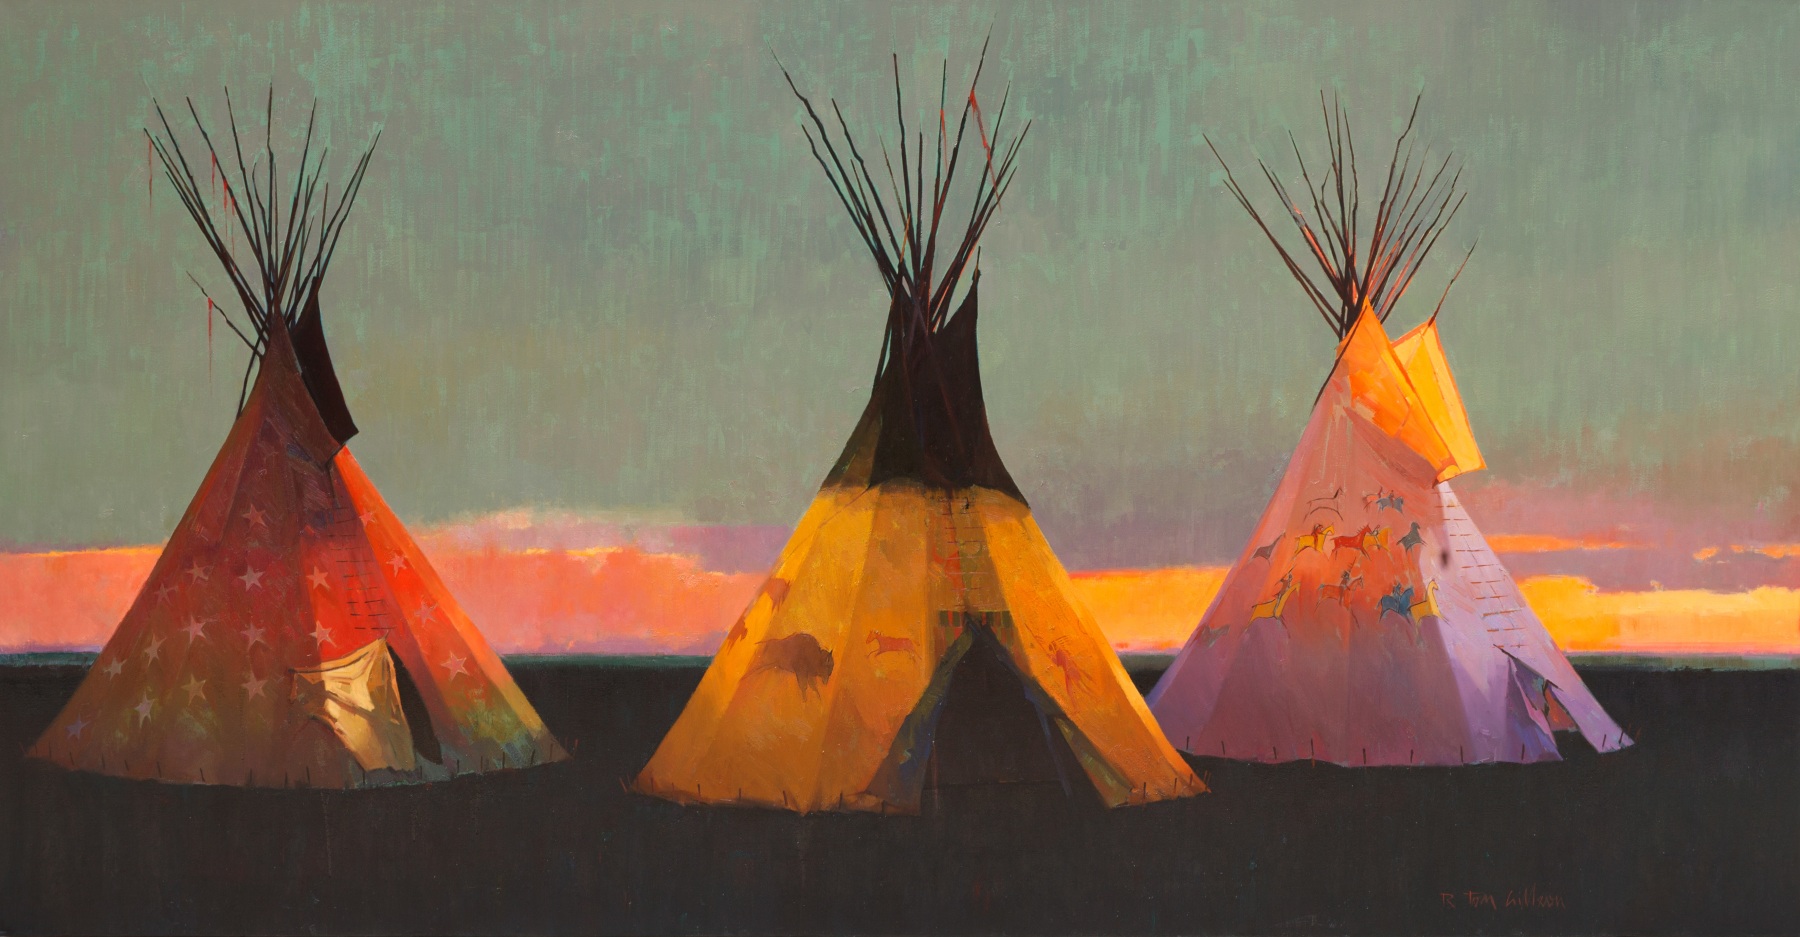 Native Trilogy
Oil on canvas
56 x 90 inches
SOLD